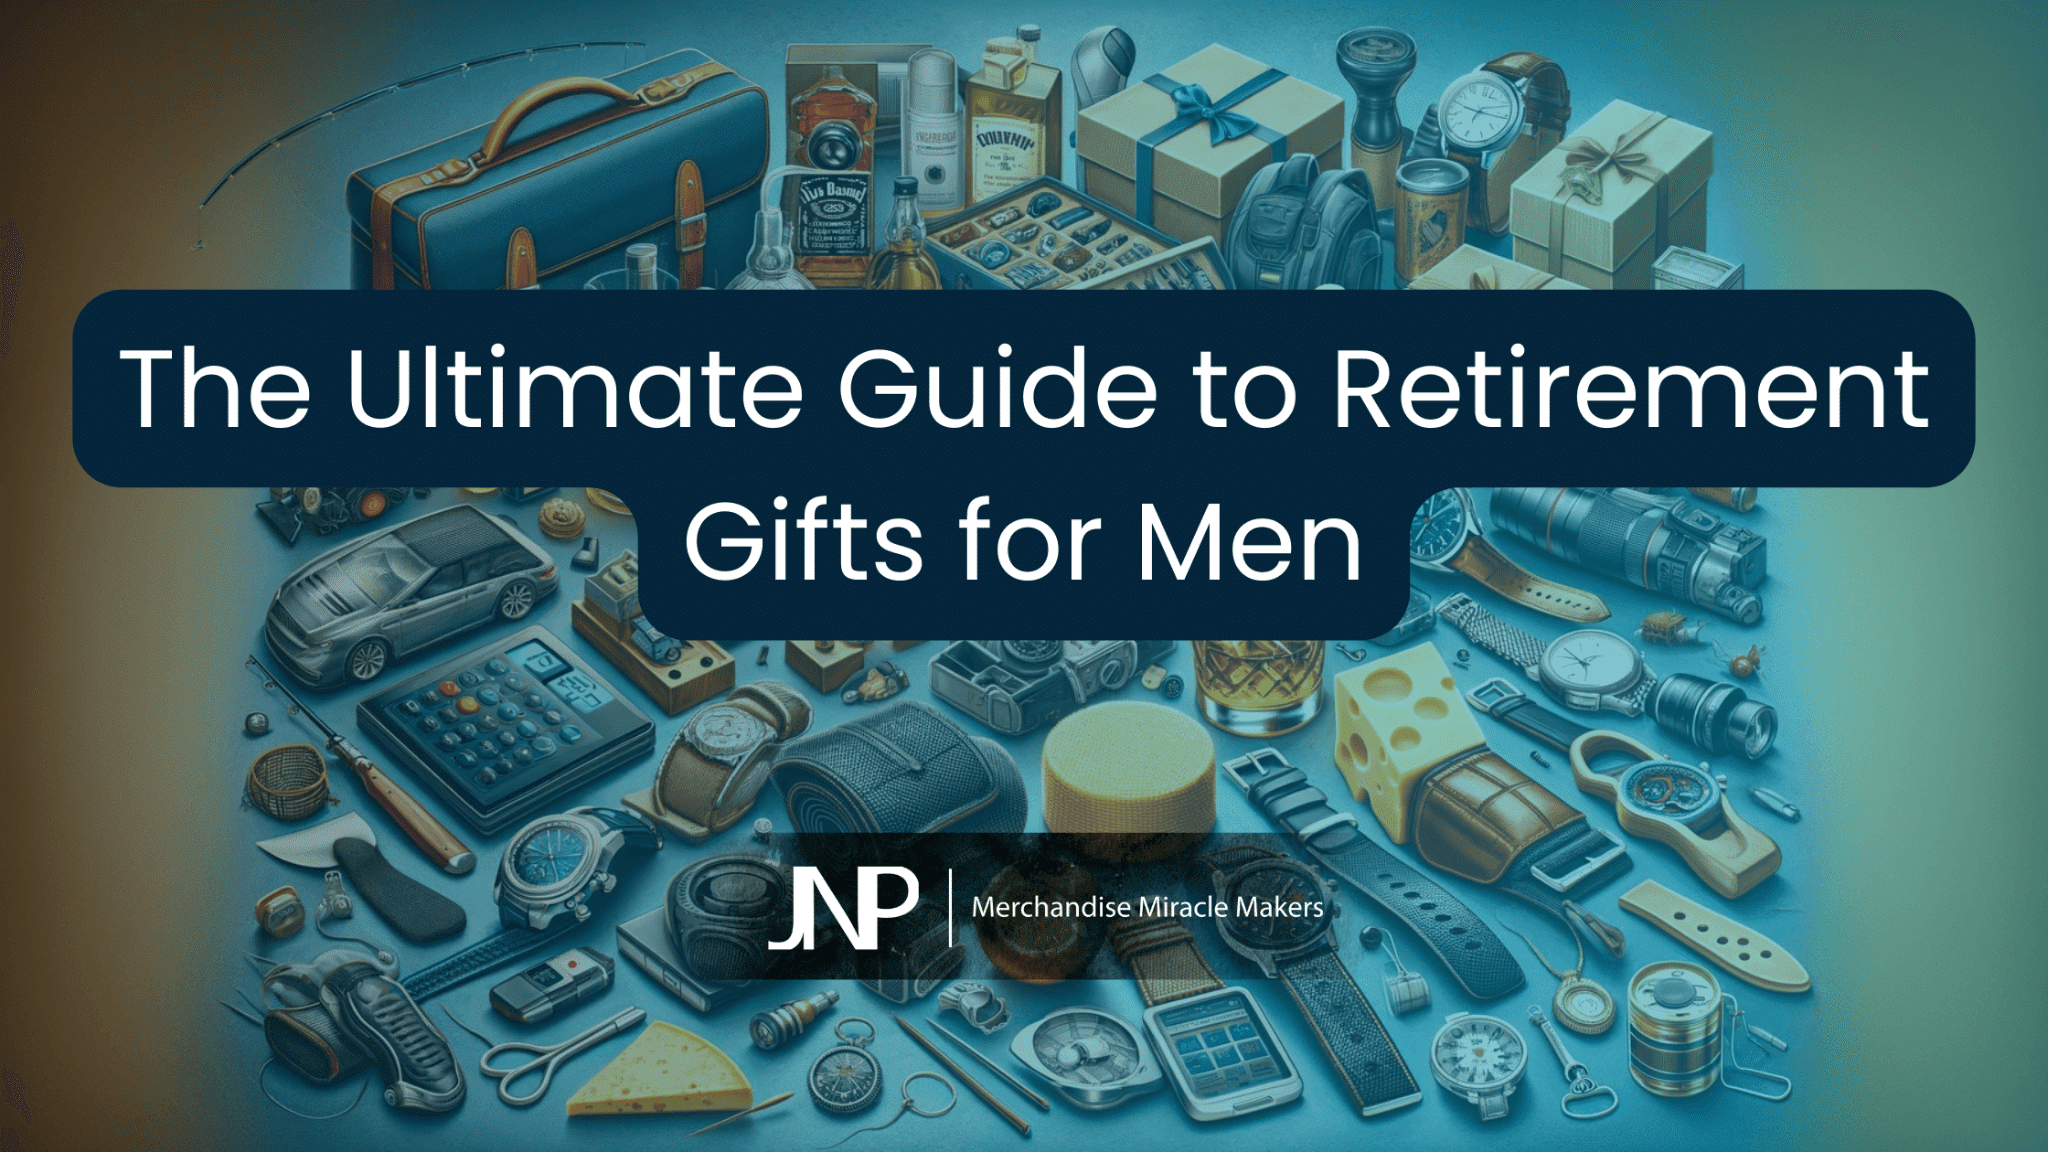 The Ultimate Guide to Retirement Gifts for Men: 40 Gift Ideas